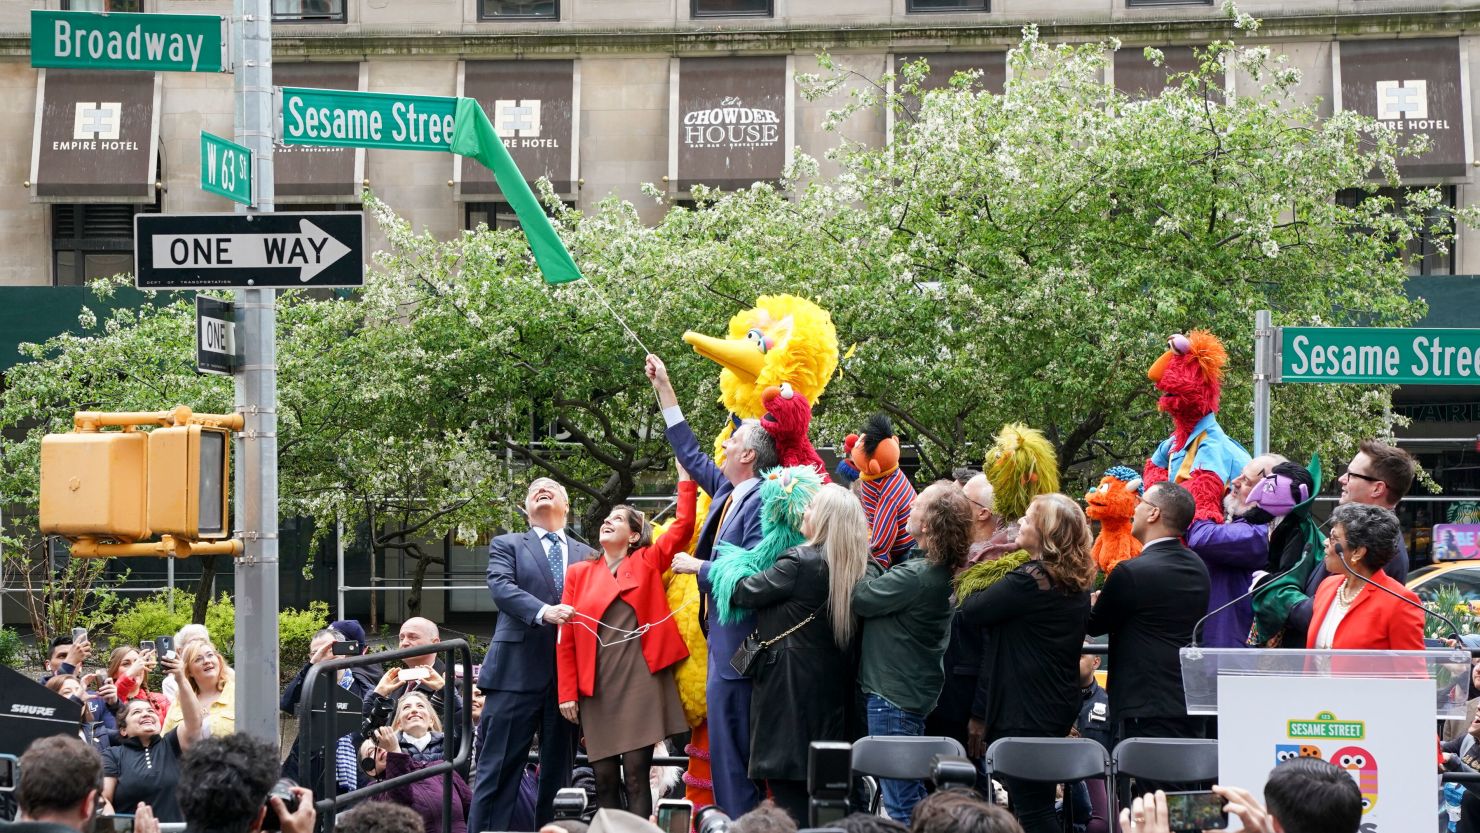 In honor of Sesame Street's 50th anniversary, the City of New York officially named West 63rd Street and Broadway "Sesame Street" and declared May 1, 2019, "Sesame Street Day.